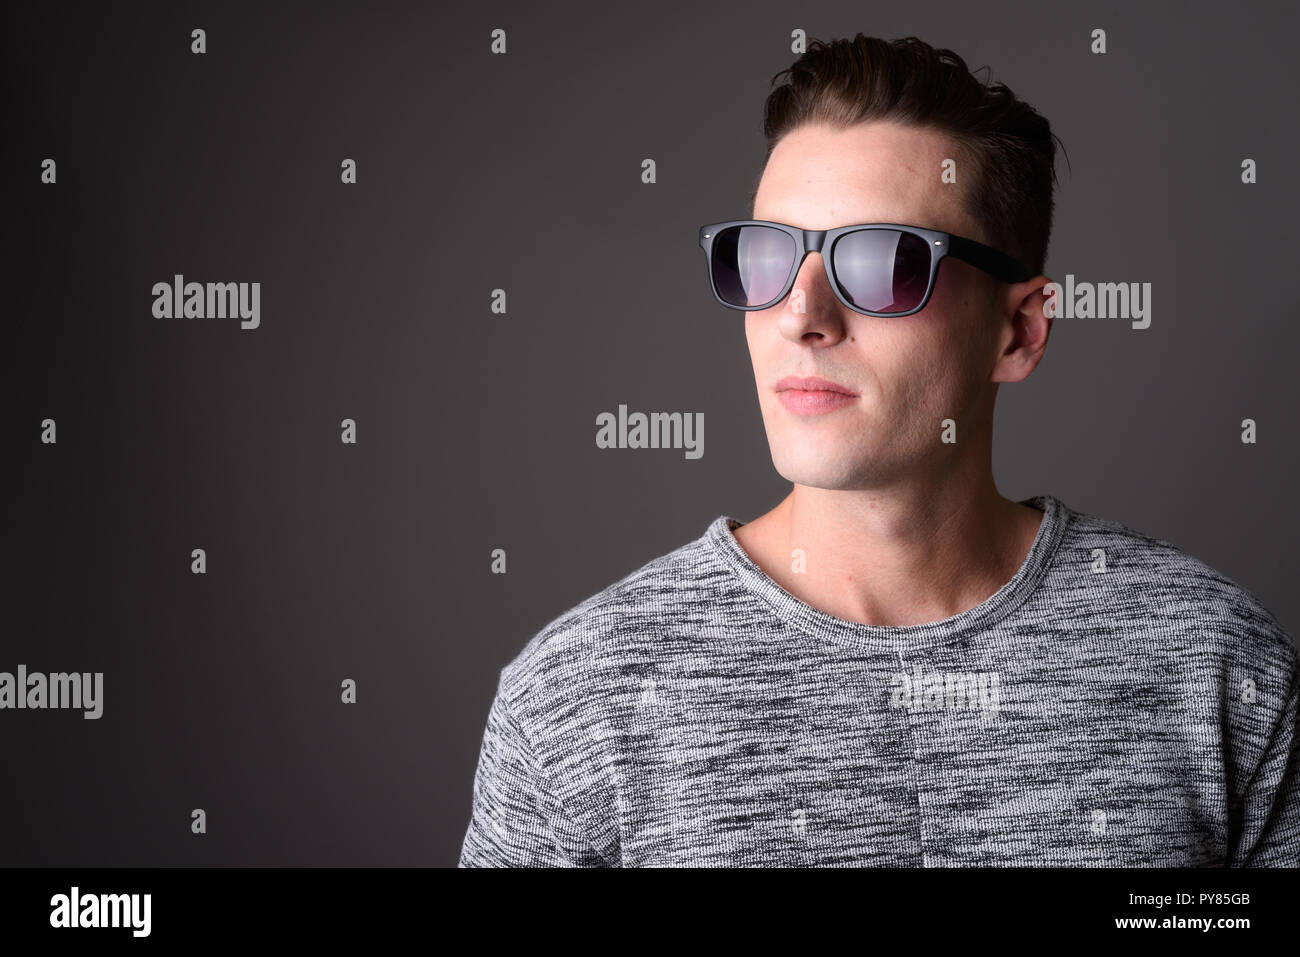 Portrait of young handsome man wearing sunglasses Stock Photo